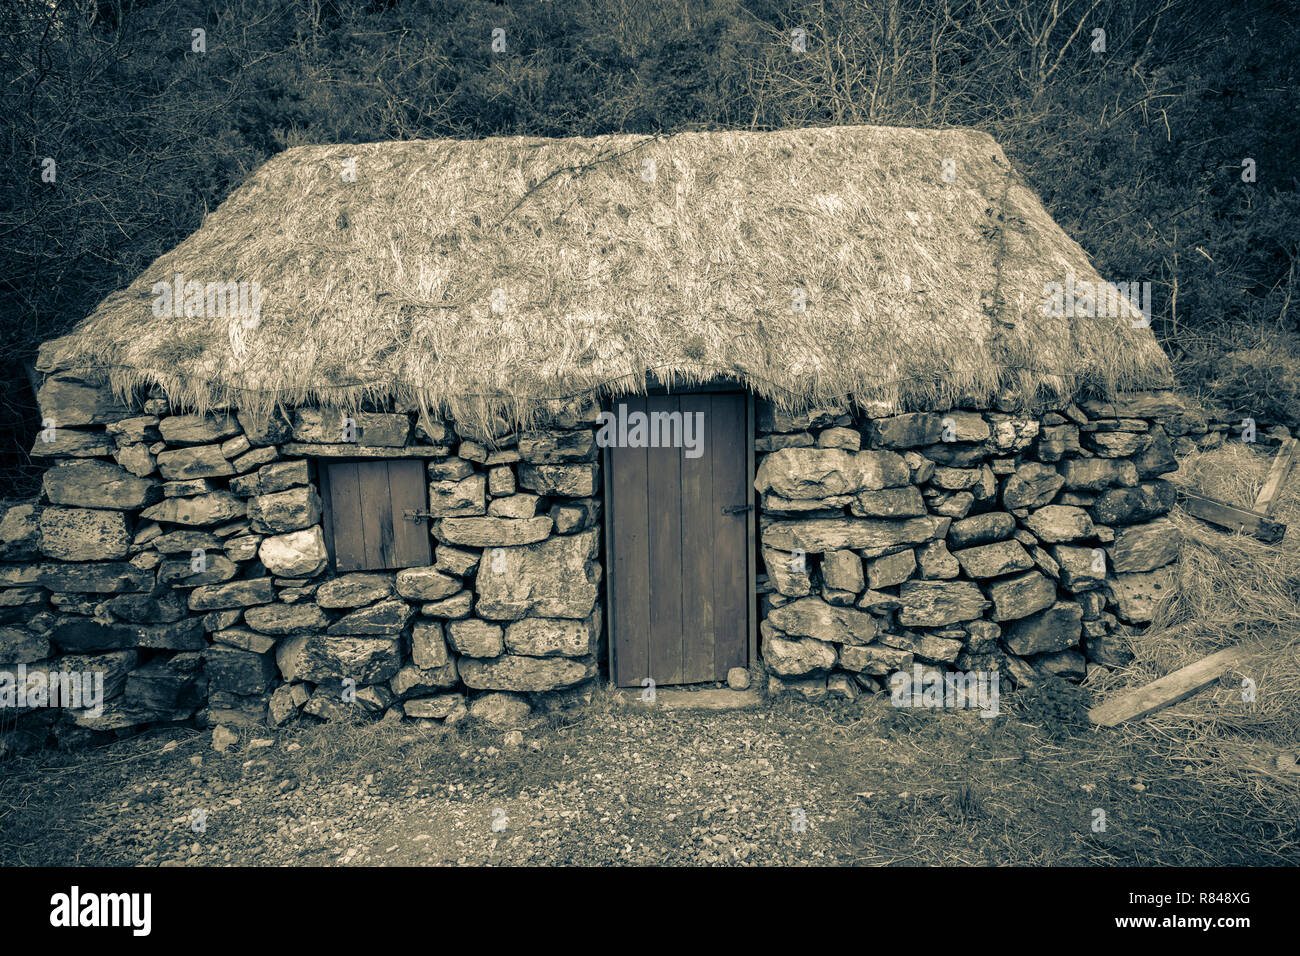 Ireland,Connemara Heritage Centre, restored prefamine cottage of Dan O' Hara who was forced to emigrate in the 1840's when he was evicted from his hom Stock Photo